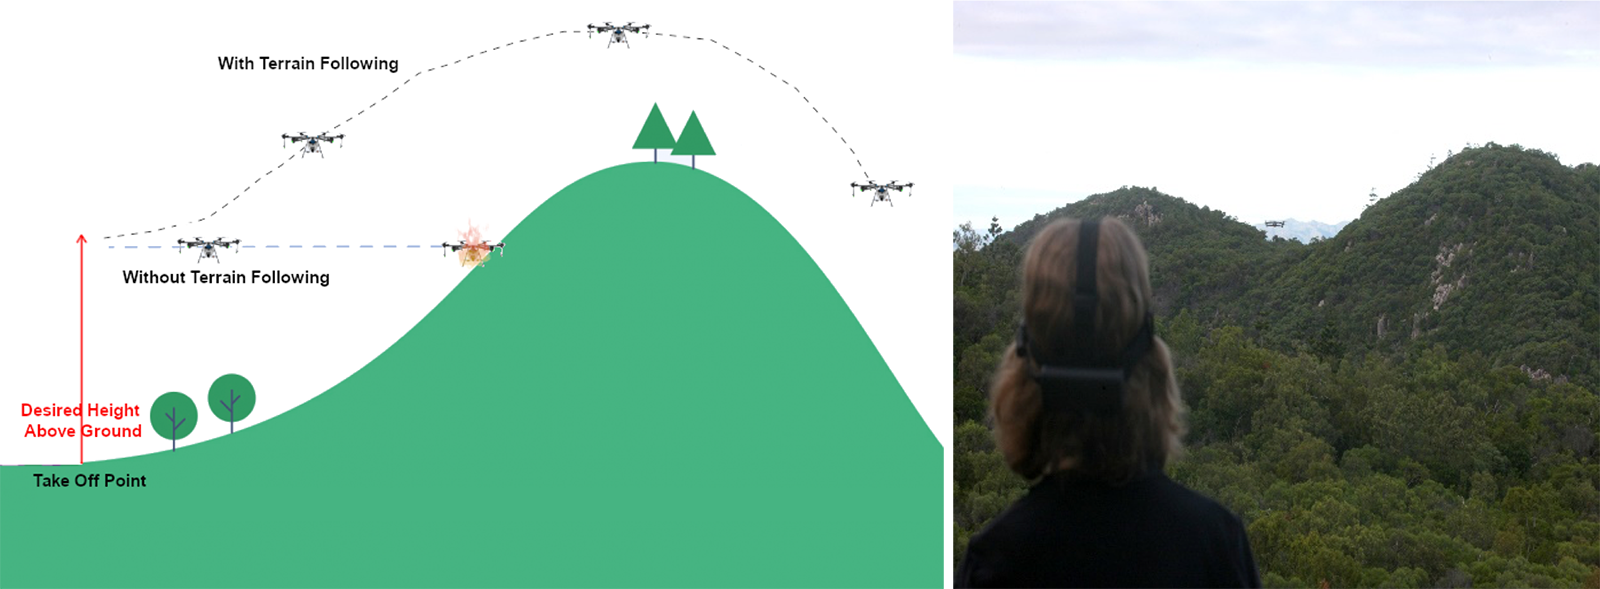 Twin images, the first a diagram of a hill with a drone adjusting its height to navigate it and another drone flying straight into it, the second a photo of an observer watching a drone fly towards some hills.